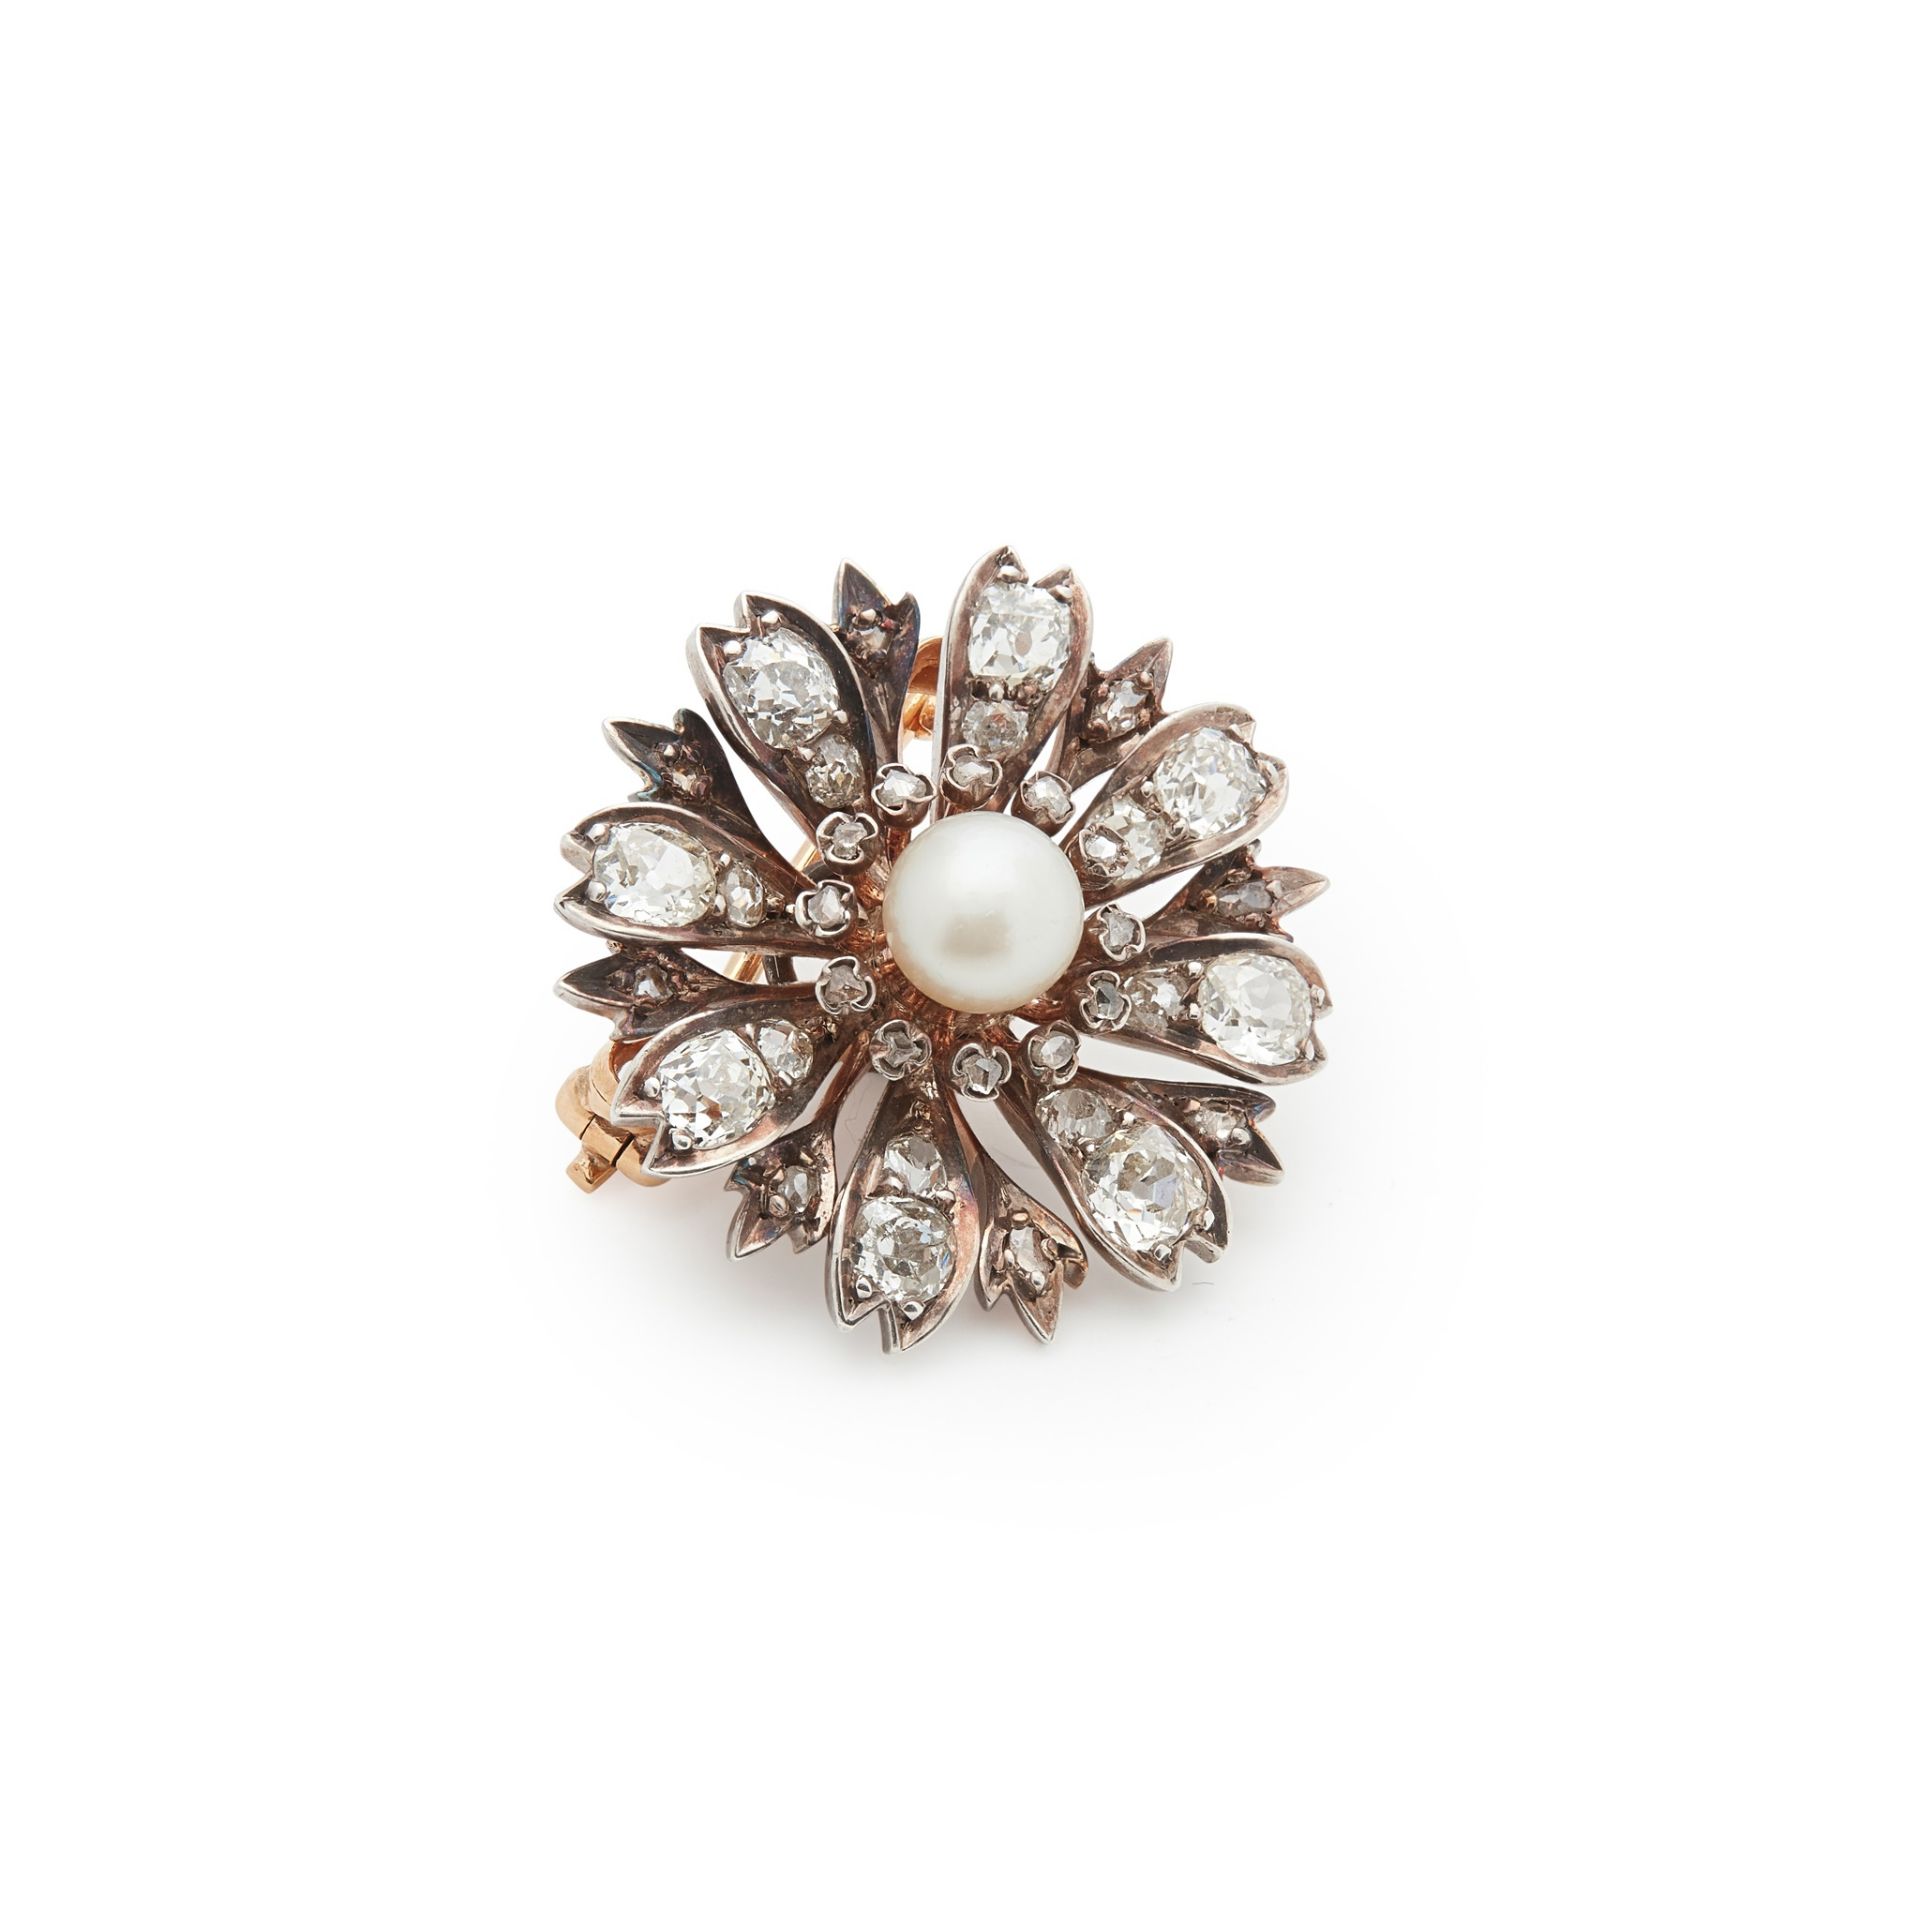 A French late 19th century pearl and diamond brooch Designed as a flower, centrally-set with a 6.